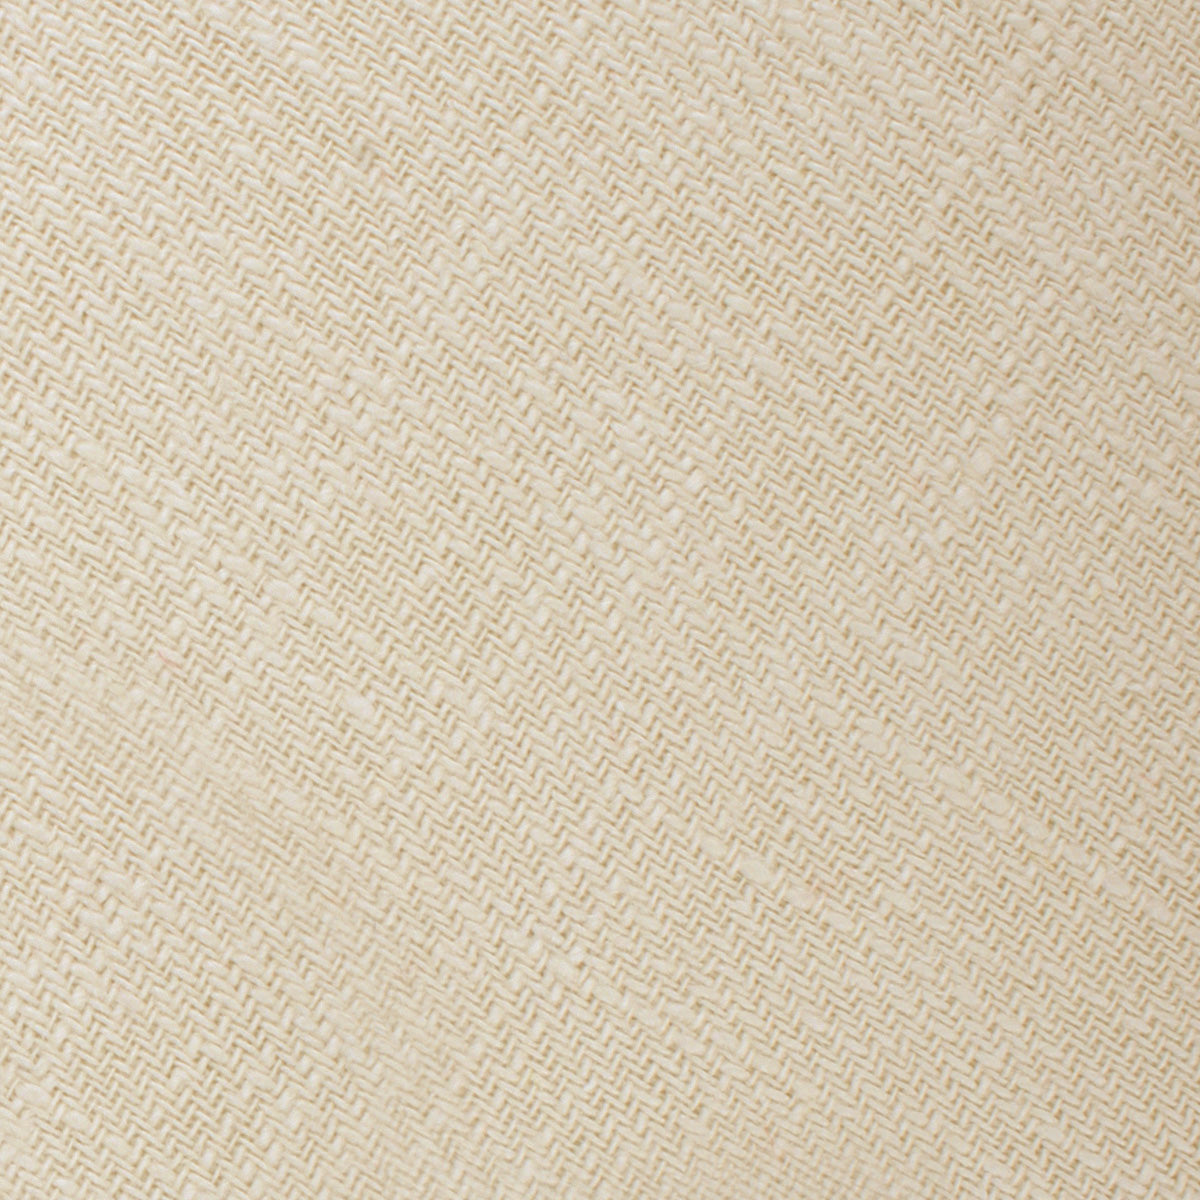 Champagne Ivory Linen Fabric Swatch